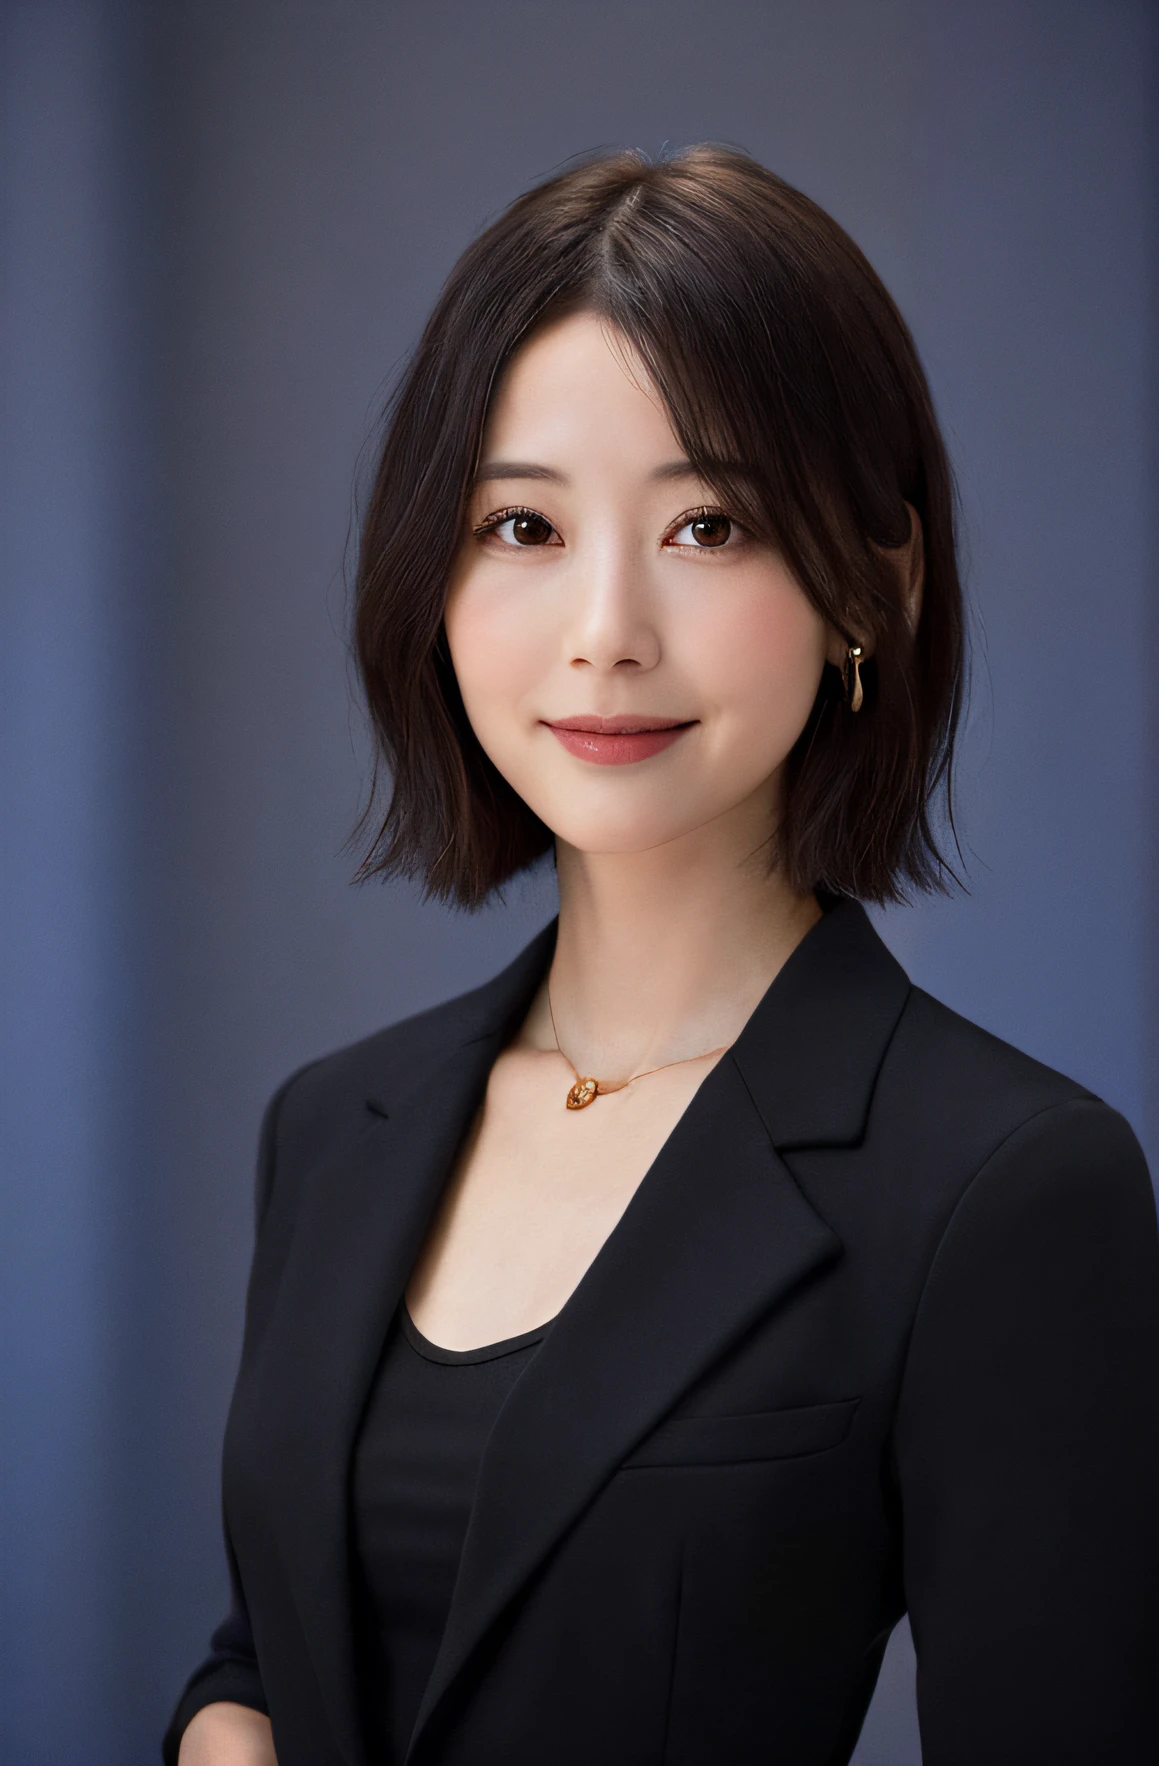 Top Quality, 1 Girl, Solo, ((Perfect Female Body Type),, (SFW)), Mai Shiraishi, Black Suit Jacket, (Upper Body), Short Hair, Photorealistic (Upper Body), Short Hair, Photorealistic 8k, RAW Photography, Portrait, Best Quality, Ultra High Definition, Photorealistic, 1 Girl,Staring At You, Gentle Expression with Lowered Eyes, G-Cup Big, Black Hair, see-through white dress, earrings, necklace,mouth closed, smile, eyelashes, beautiful breasts, spread legs, movie lighting, depth of field, lens flare